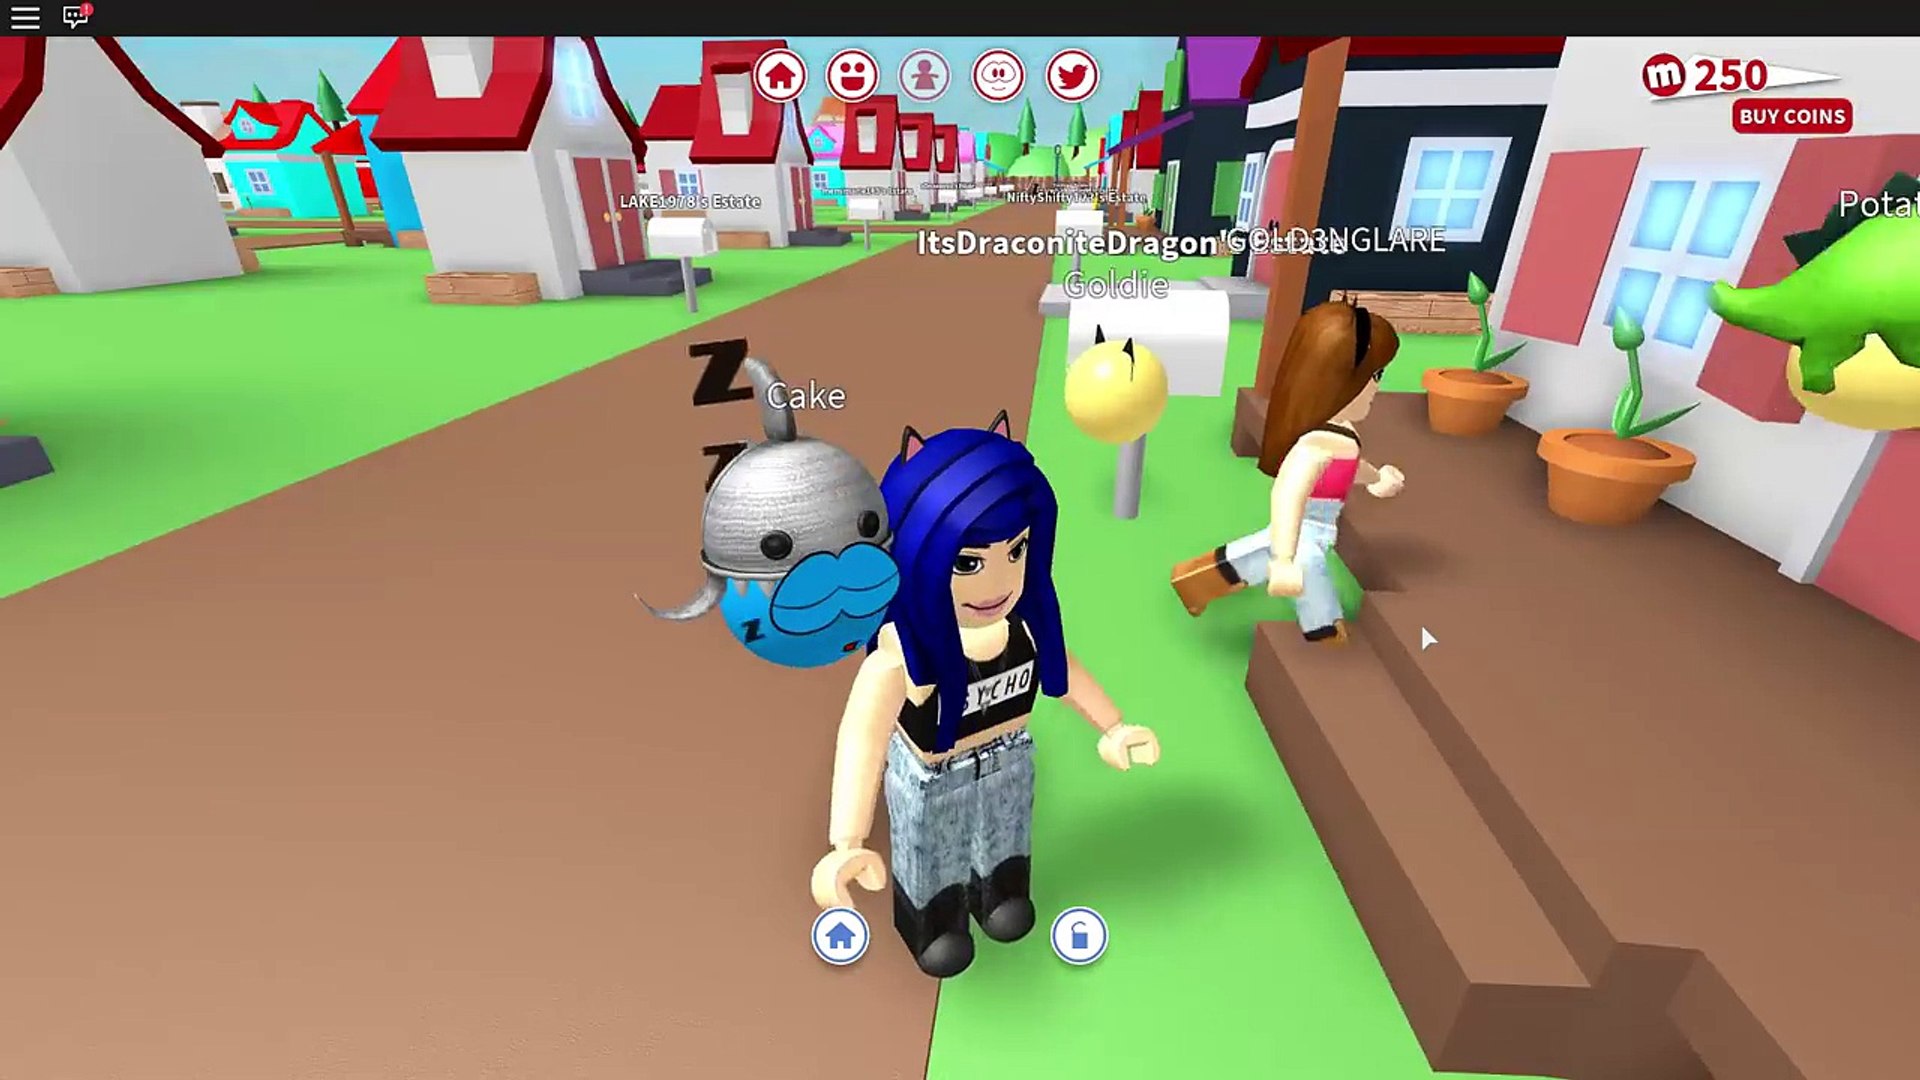 Its Funneh Roblox Meepcity